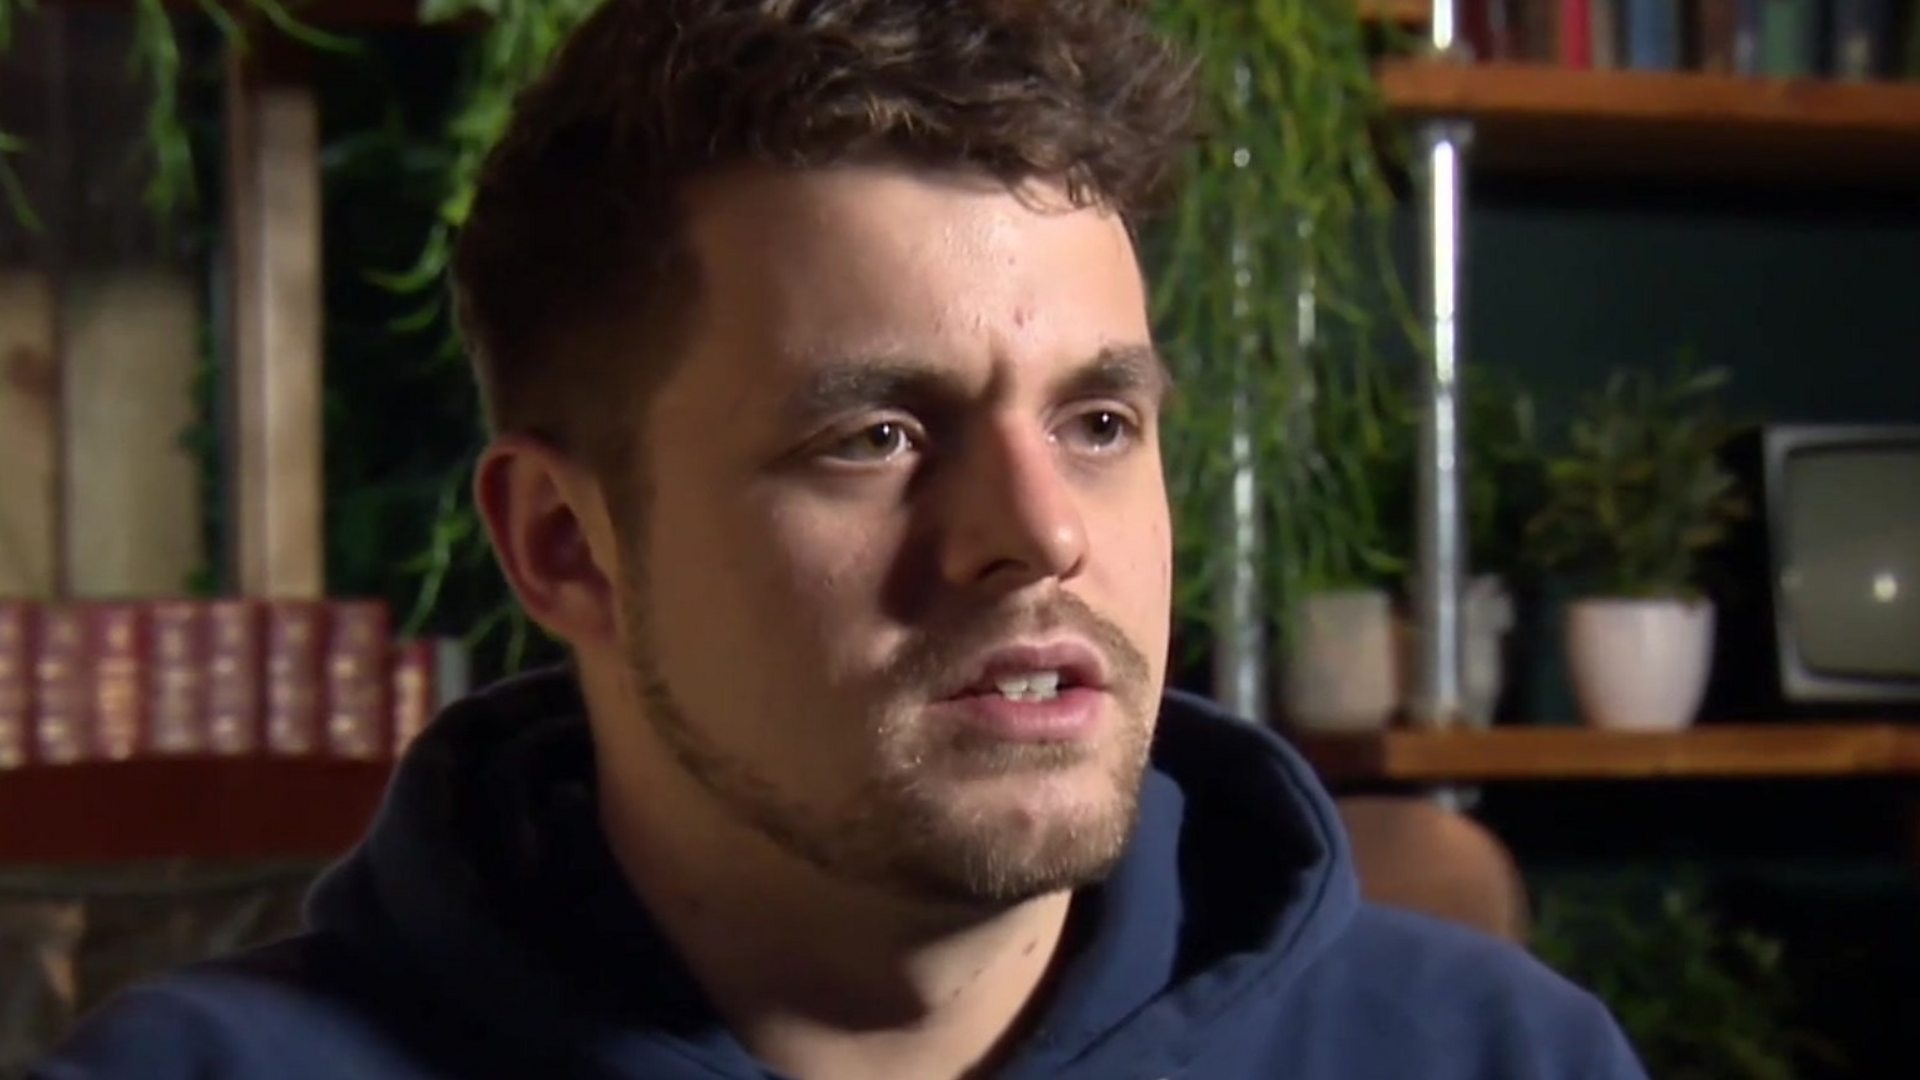 Male rape survivor: 'I just wanted to die'